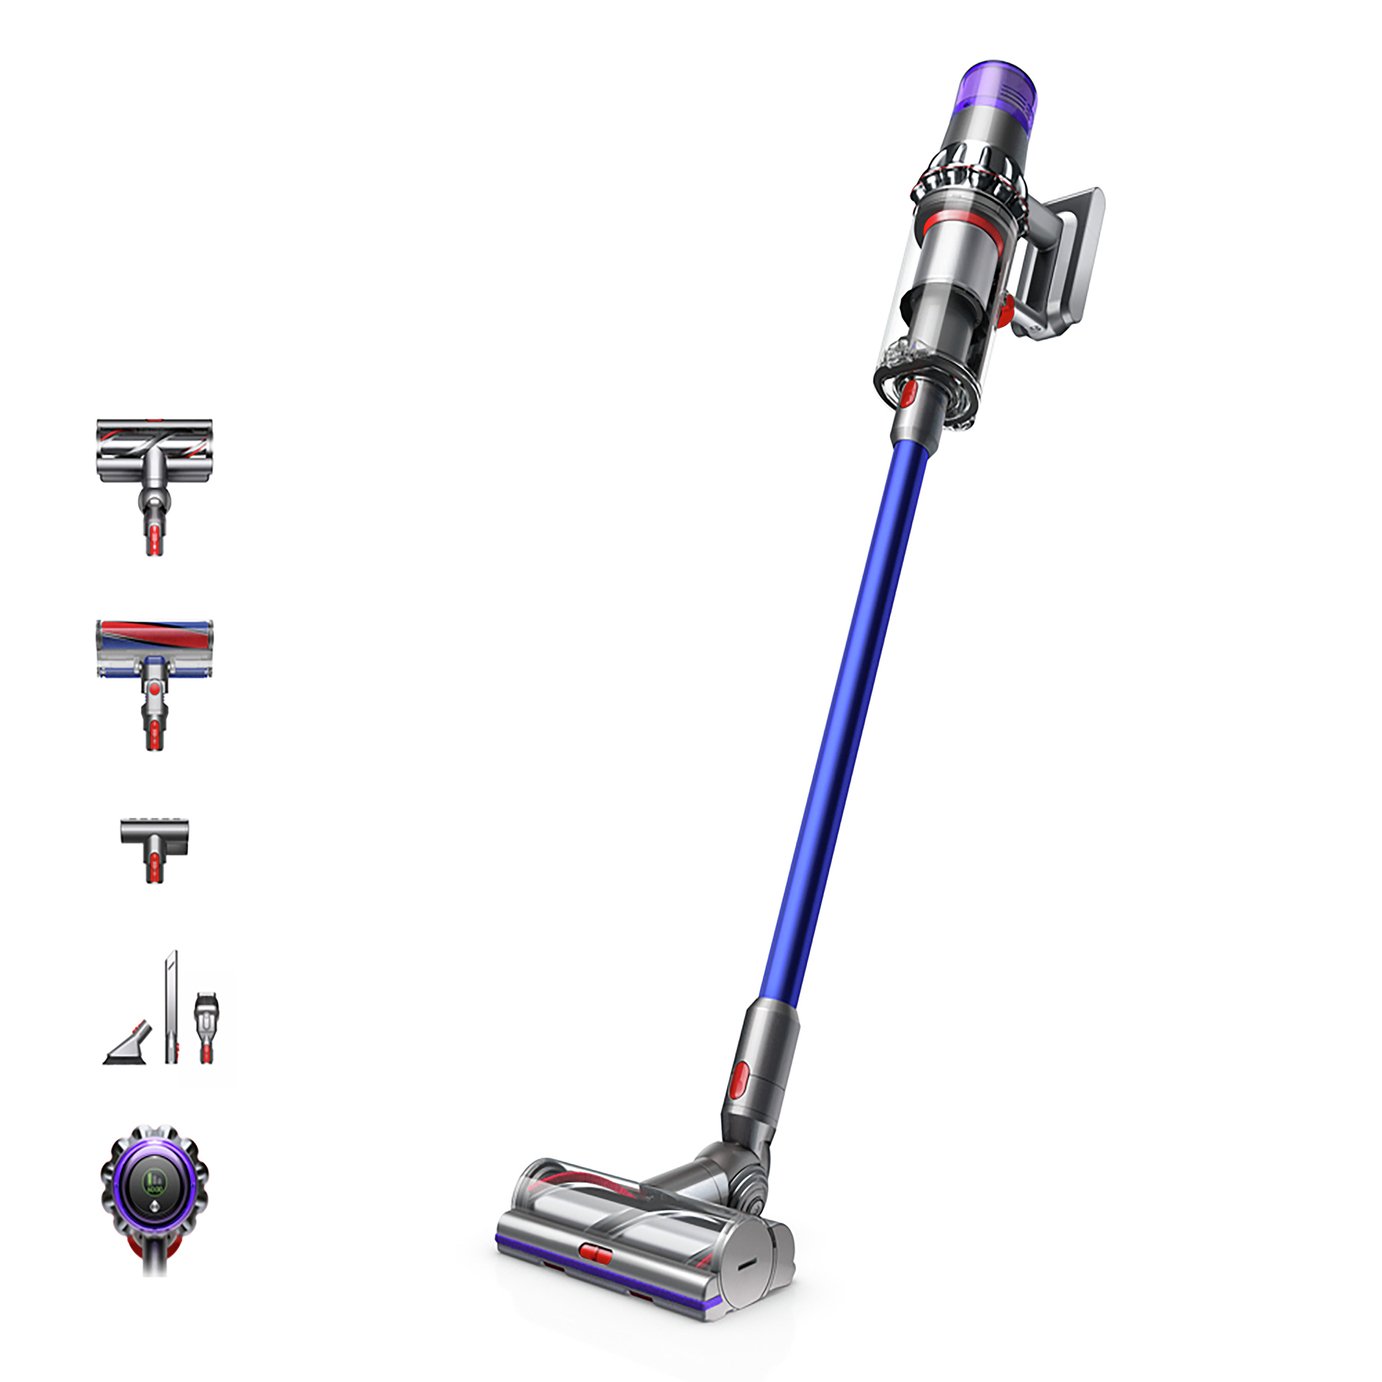 Dyson V11 Absolute Cordless Vacuum Cleaner